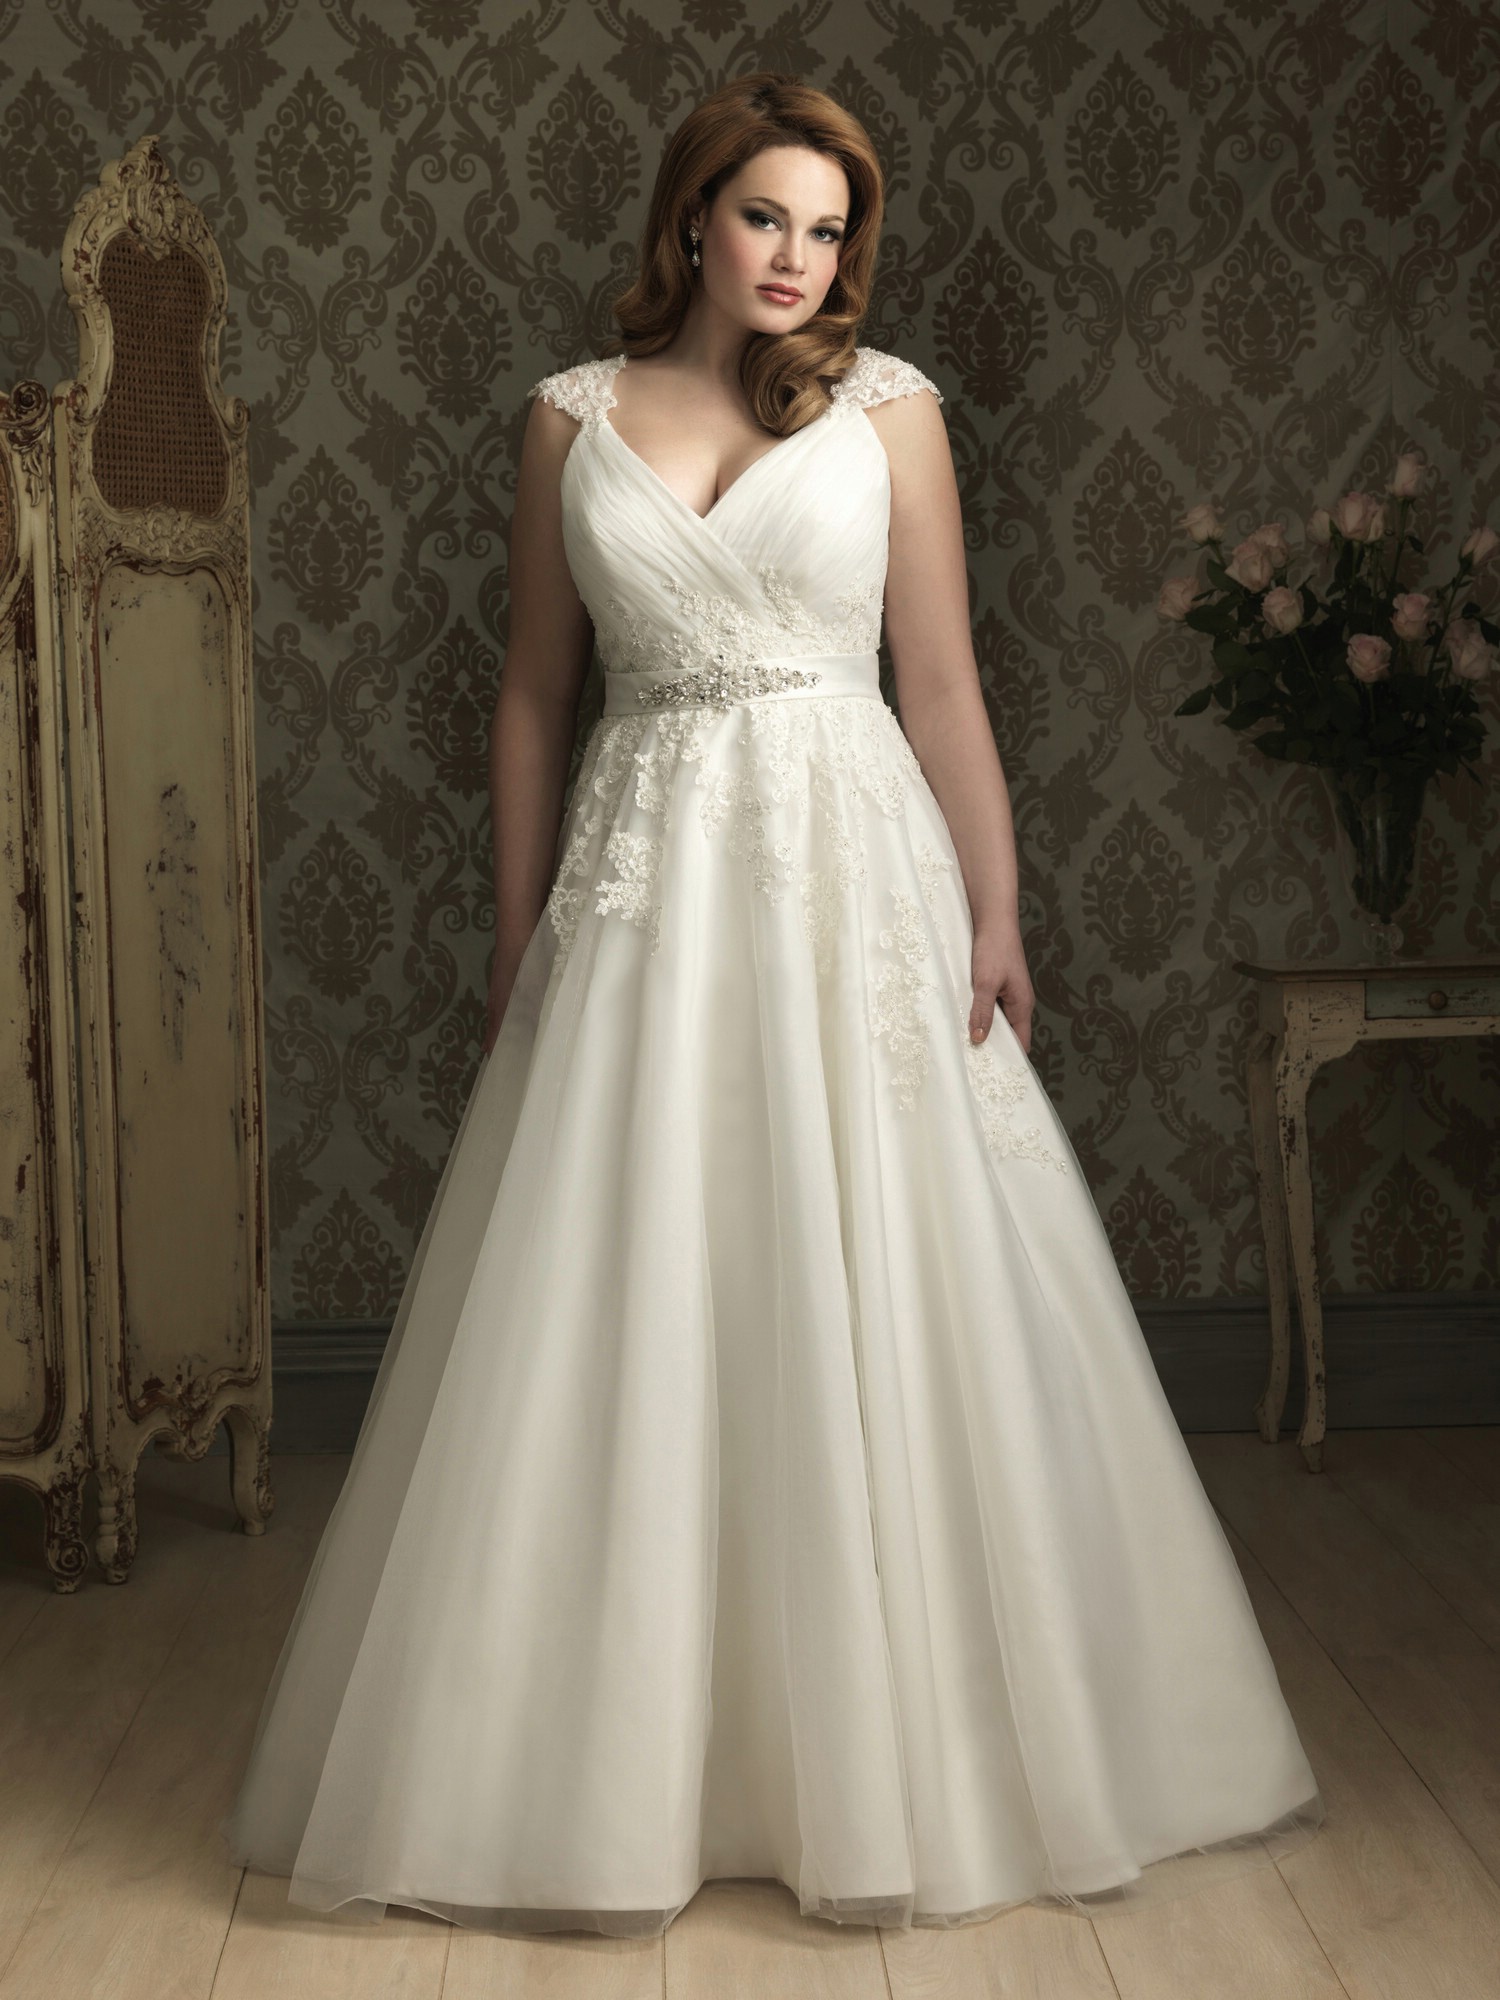 lace-ball-gown-wedding-dresses-for-plus-size-design-ideas